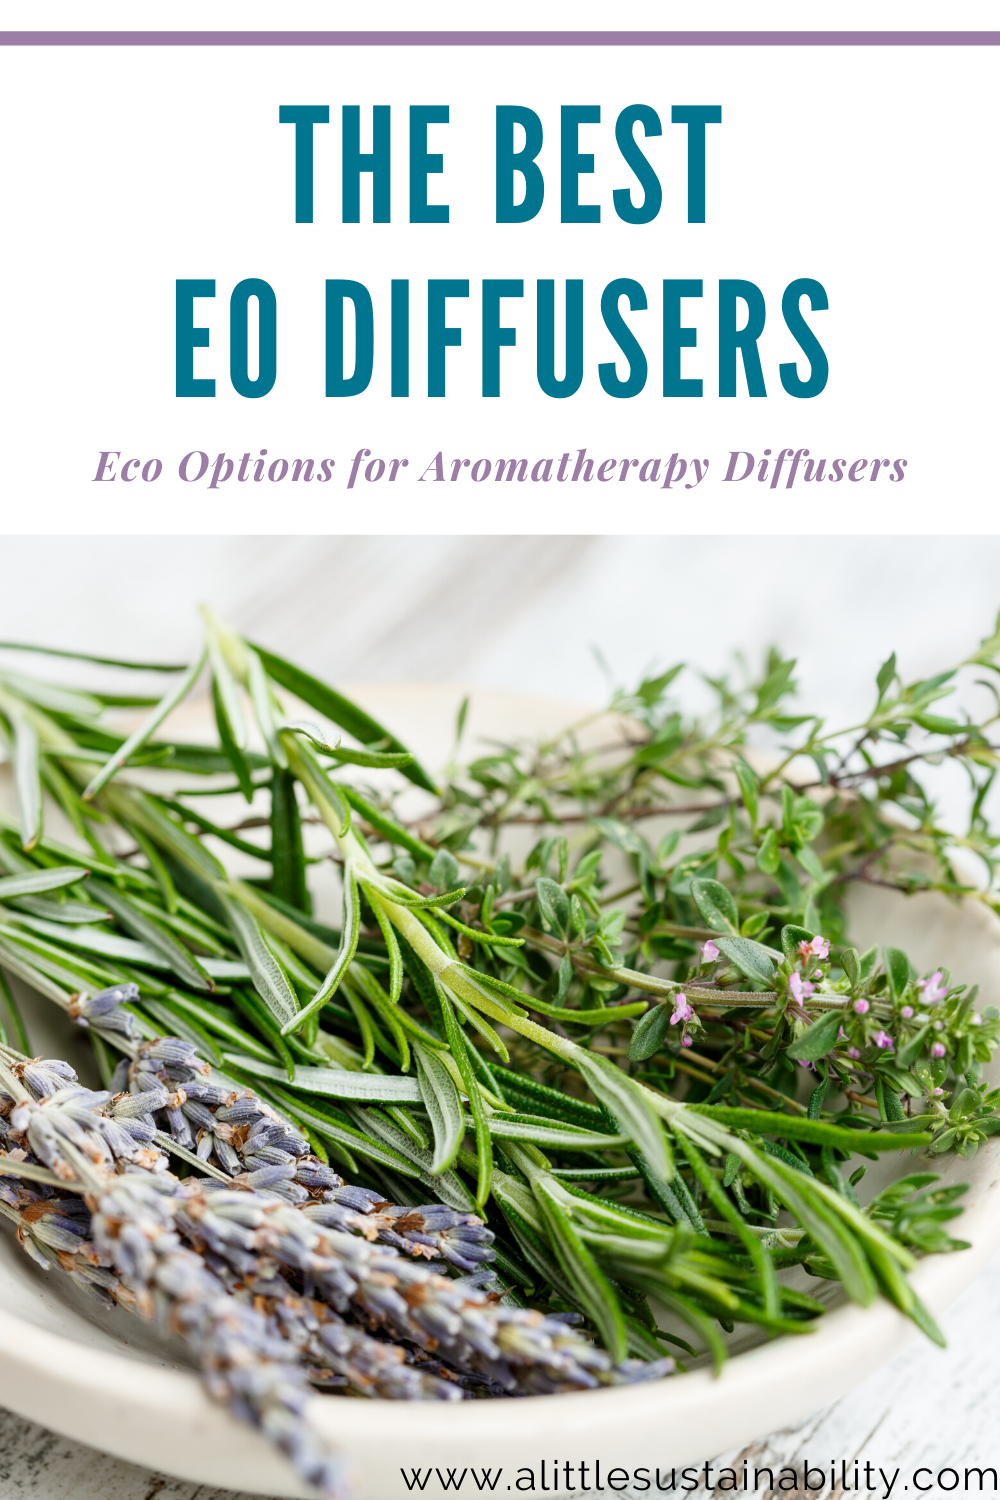 The Best EO Diffusers. Eco Options for Aromatherapy Diffusers. The best eco-friendly diffusers of 2020 come in many different forms. Most of the items we've featured are plastic free or have a small amount of bpa free plastic in them. Choose one from our list as you begin to transform your home to become more eco-friendly and low impact in 2020. Diffusers are always a nice touch to add ambience, and natural fragrances to any space. The essential oils that are diffused usually have nice benefits depending on the oil you are using to help you breathe easy, feel relaxed, or focused and more. When living a sustainable life there is a lot to consider, like the material used in the product, how it is produced, and the values of the company the products are on.